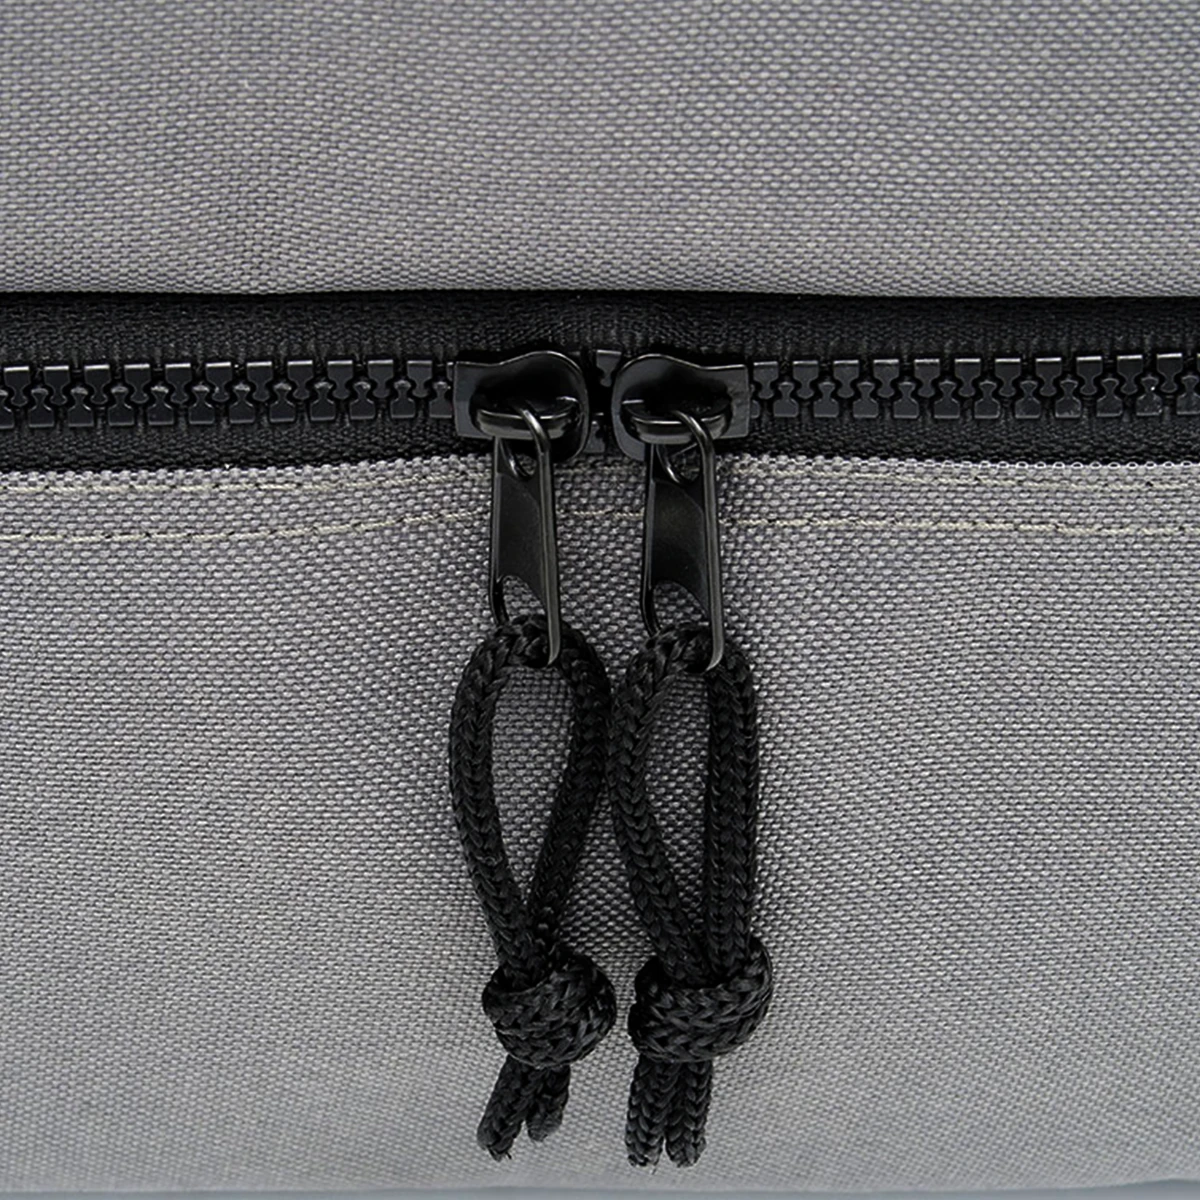 Call of Duty Rolltop Backpack "Blind" Grey Thumbnail 5